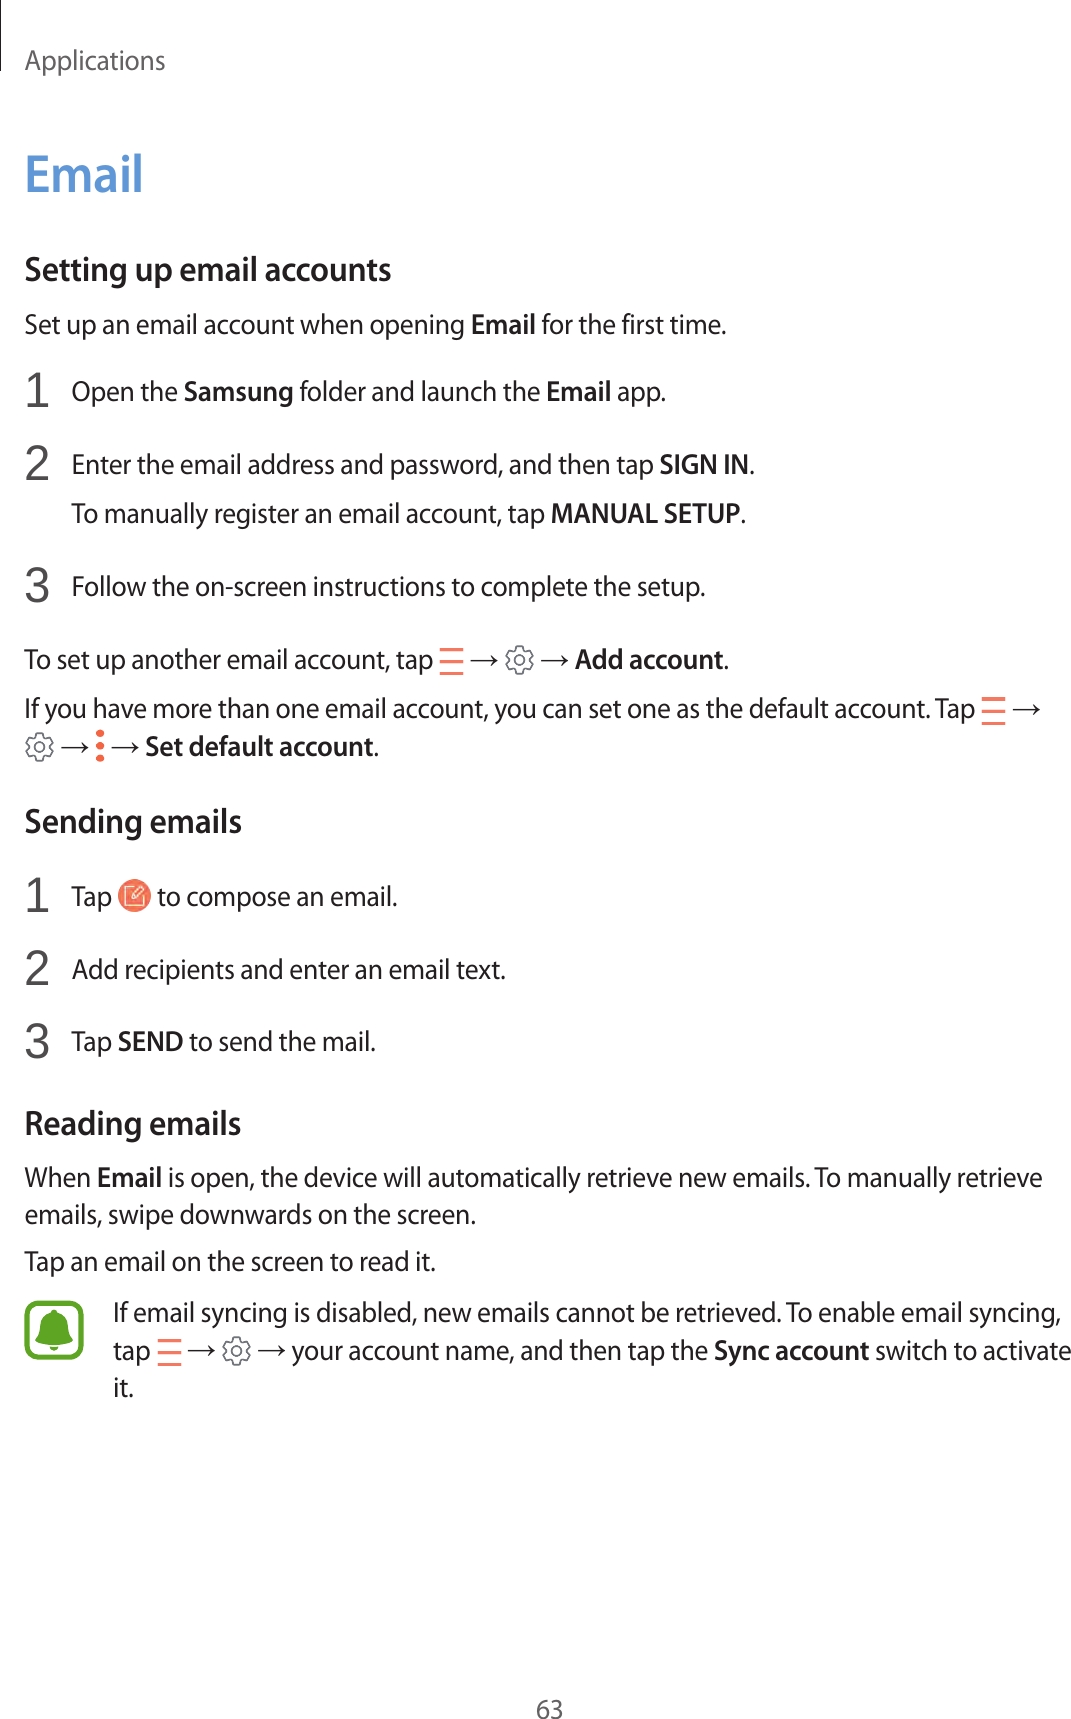 Applications63EmailSetting up email accountsSet up an email account when opening Email for the first time.1  Open the Samsung folder and launch the Email app.2  Enter the email address and password, and then tap SIGN IN.To manually register an email account, tap MANUAL SETUP.3  Follow the on-screen instructions to complete the setup.To set up another email account, tap   →   → Add account.If you have more than one email account, you can set one as the default account. Tap   →  →   → Set default account.Sending emails1  Tap   to compose an email.2  Add recipients and enter an email text.3  Tap SEND to send the mail.Reading emailsWhen Email is open, the device will automatically retrieve new emails. To manually retrieve emails, swipe downwards on the screen.Tap an email on the screen to read it.If email syncing is disabled, new emails cannot be retrieved. To enable email syncing, tap   →   → your account name, and then tap the Sync account switch to activate it.